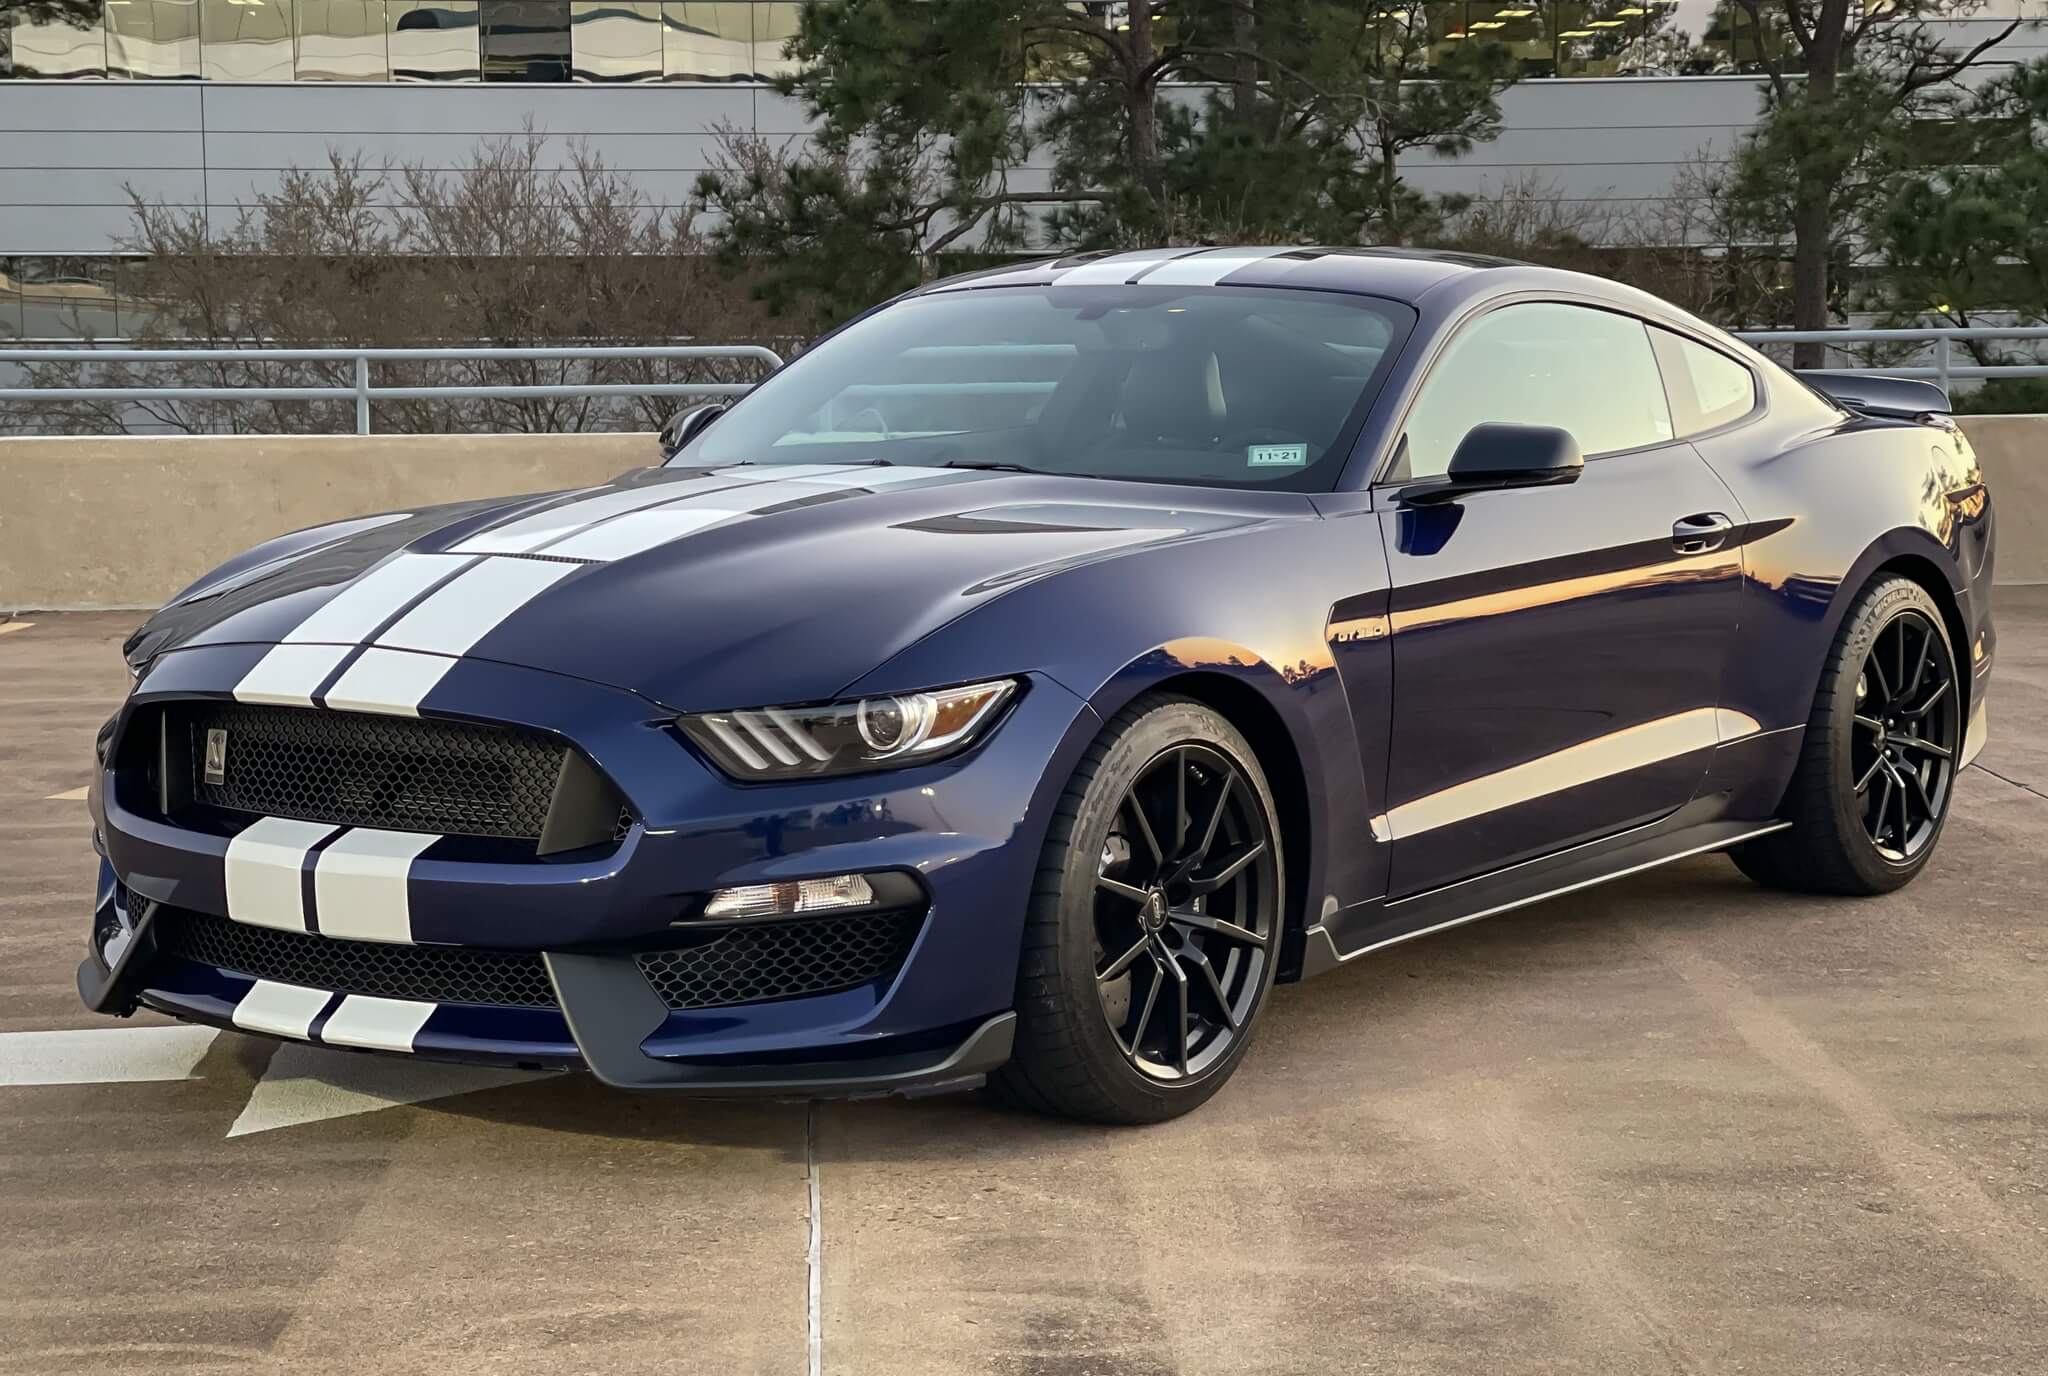 3k-Mile 2018 Ford Mustang Shelby GT350 | PCARMARKET